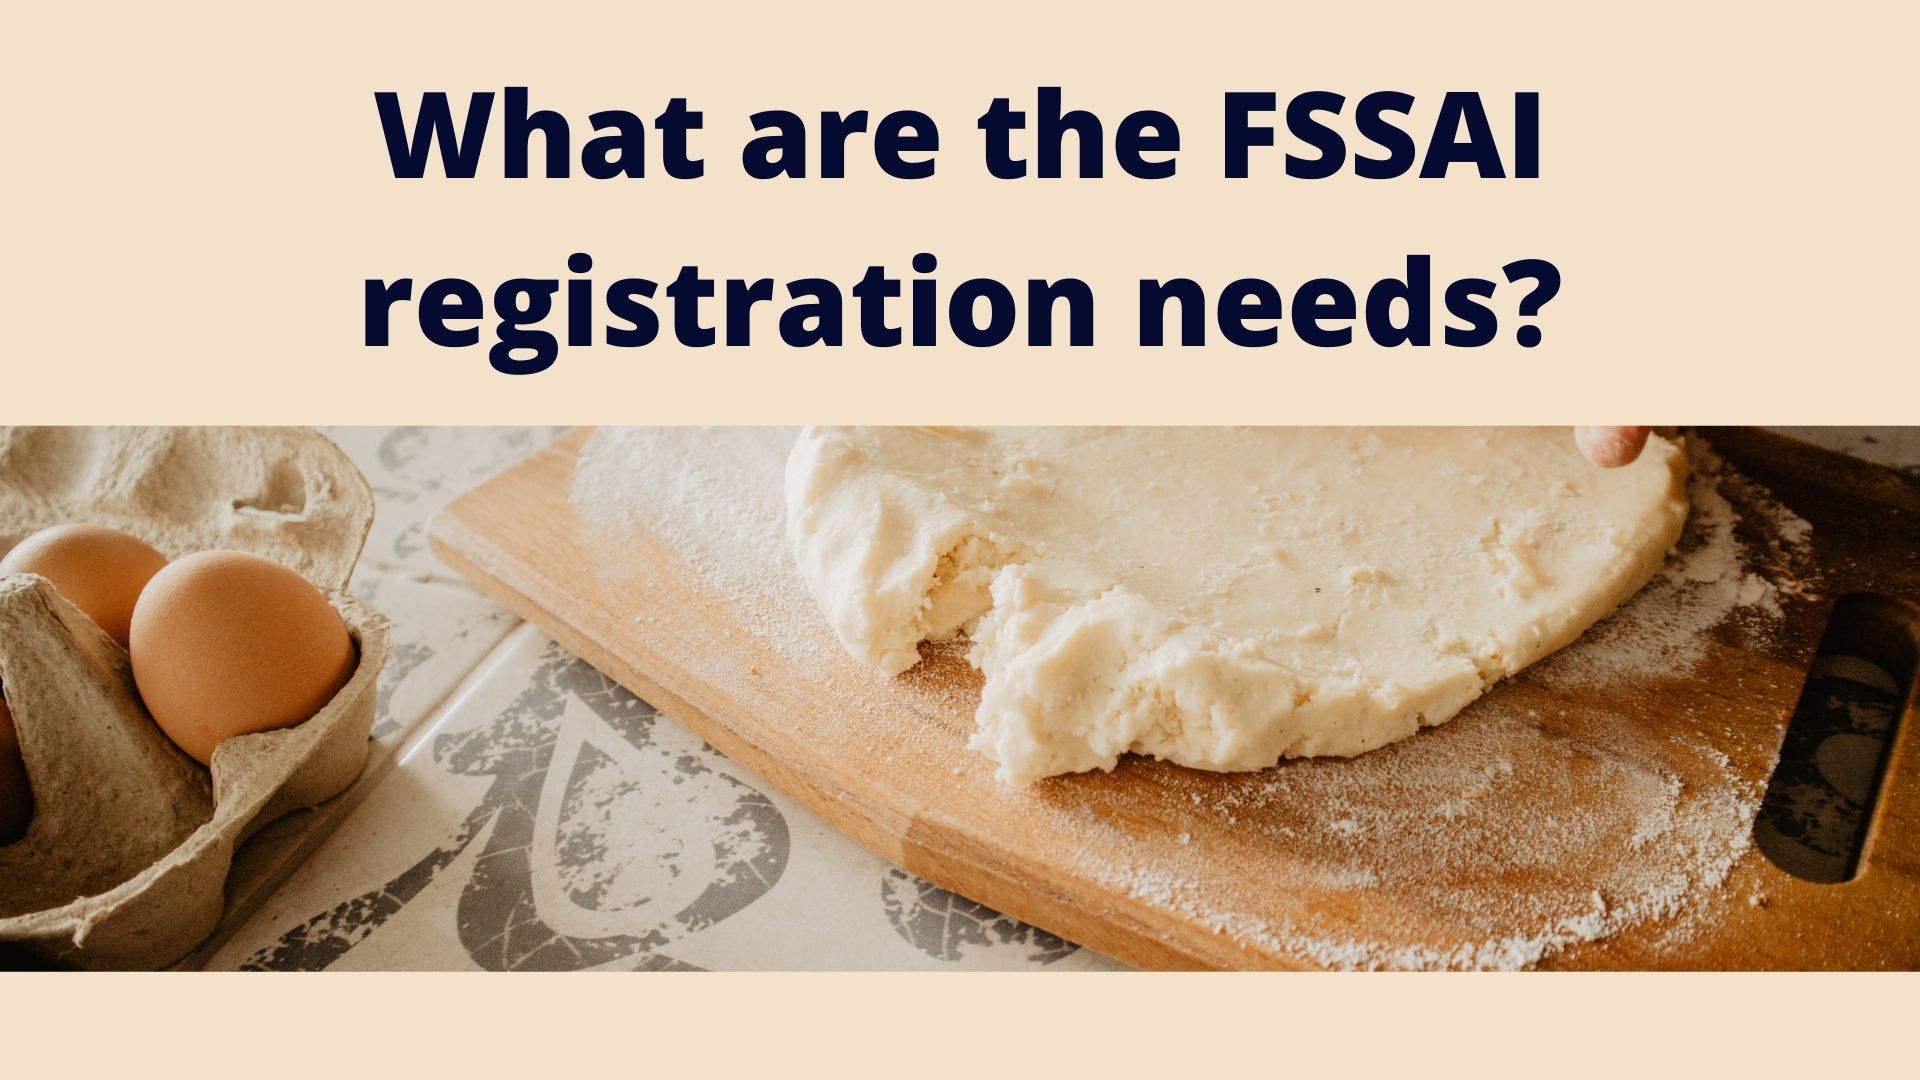 What are the FSSAI registration needs